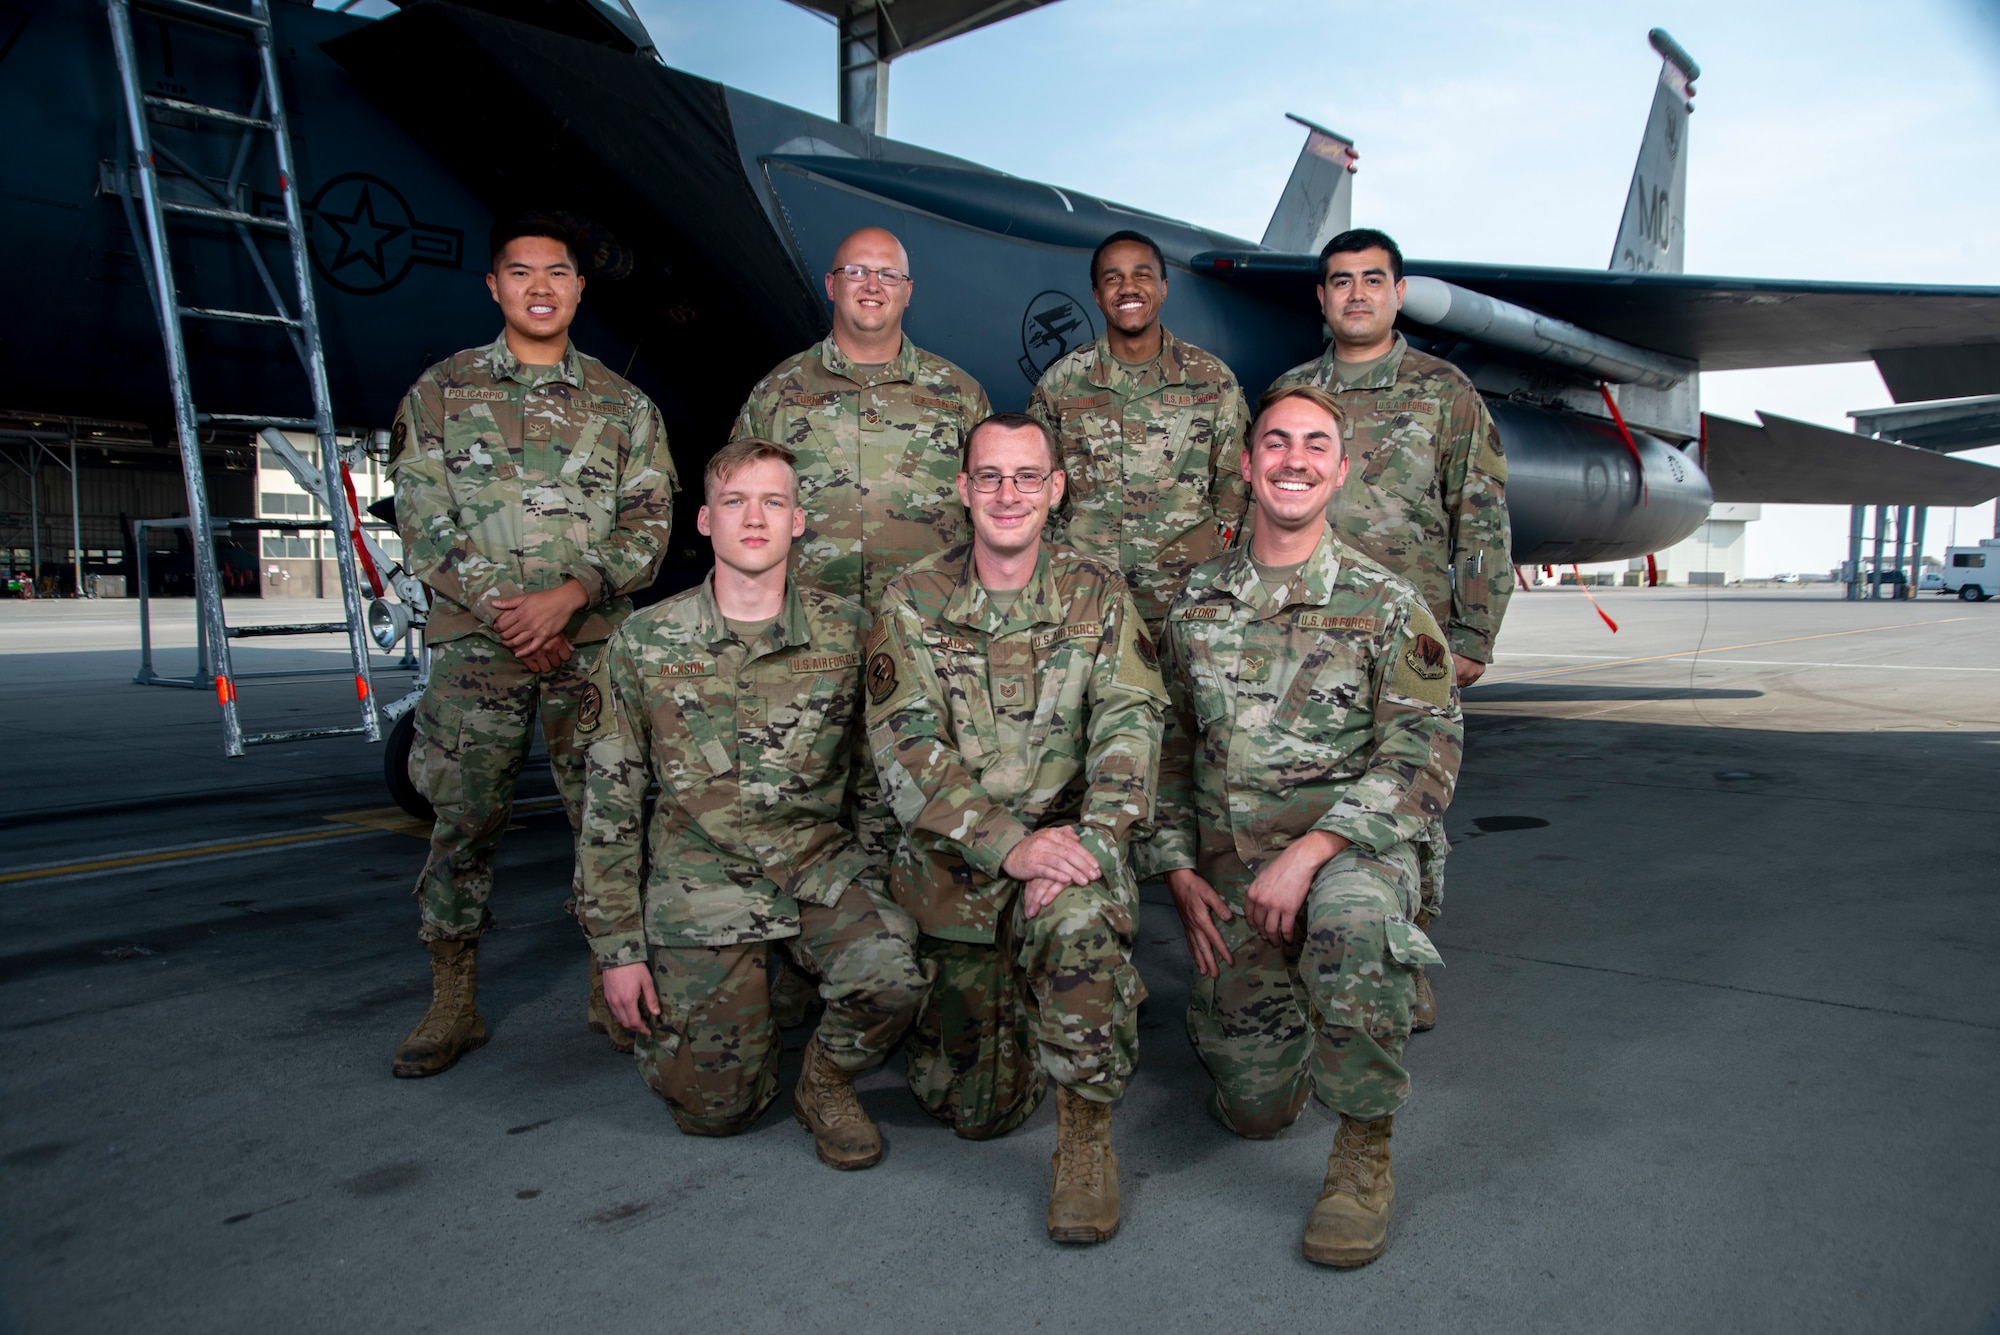 389th Fighter Squadron weapons load crew members pose in-front of an F-15E Strike Eagle, Oct. 8, 2020, at Mountain Home Air Force Base, Idaho. Integrated Combat Turns are a rapid re-arming and refueling practice where both fuels and weapons troops work side-by-side to turn aircraft around and get them back into the skies. (U.S. Air Force photo by Senior Airman JaNae Capuno)